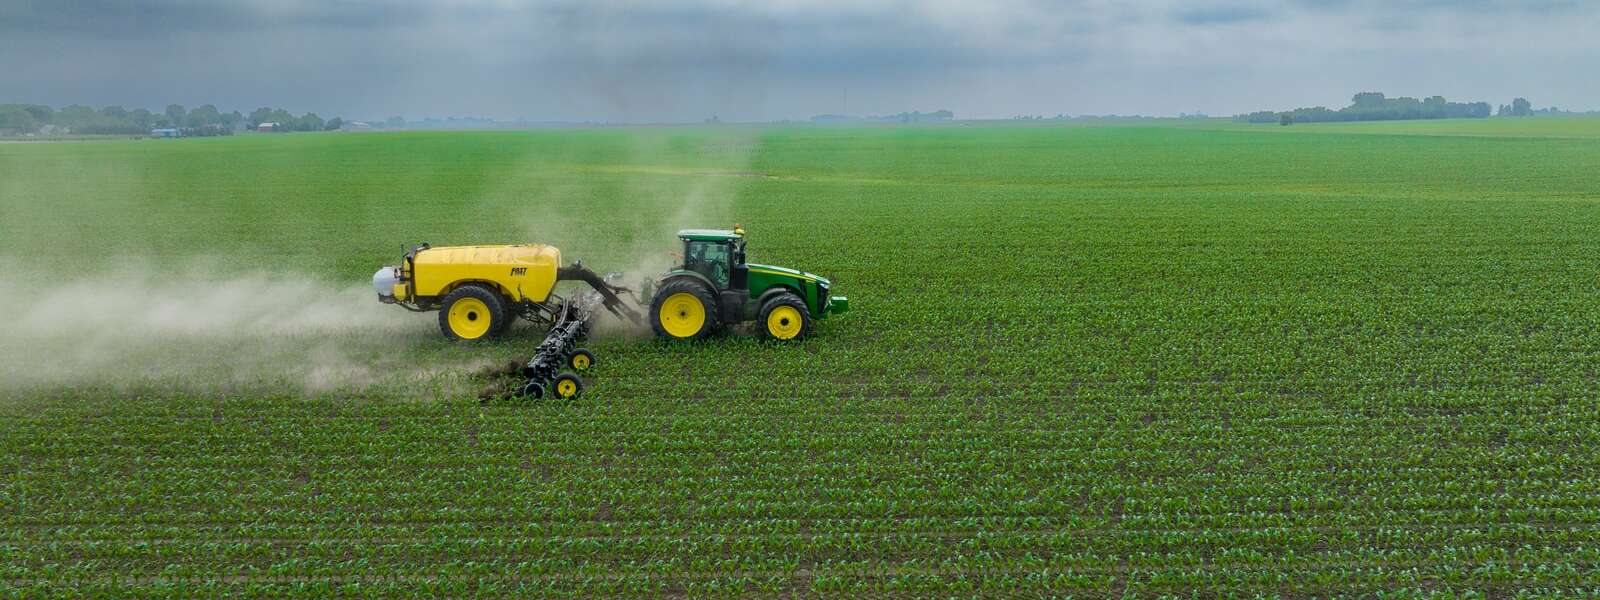 A green tractor with a yellow tank in a green field. The tractor is on the left side of the image and is moving towards the right side. Behind it is a plume of a white substance.